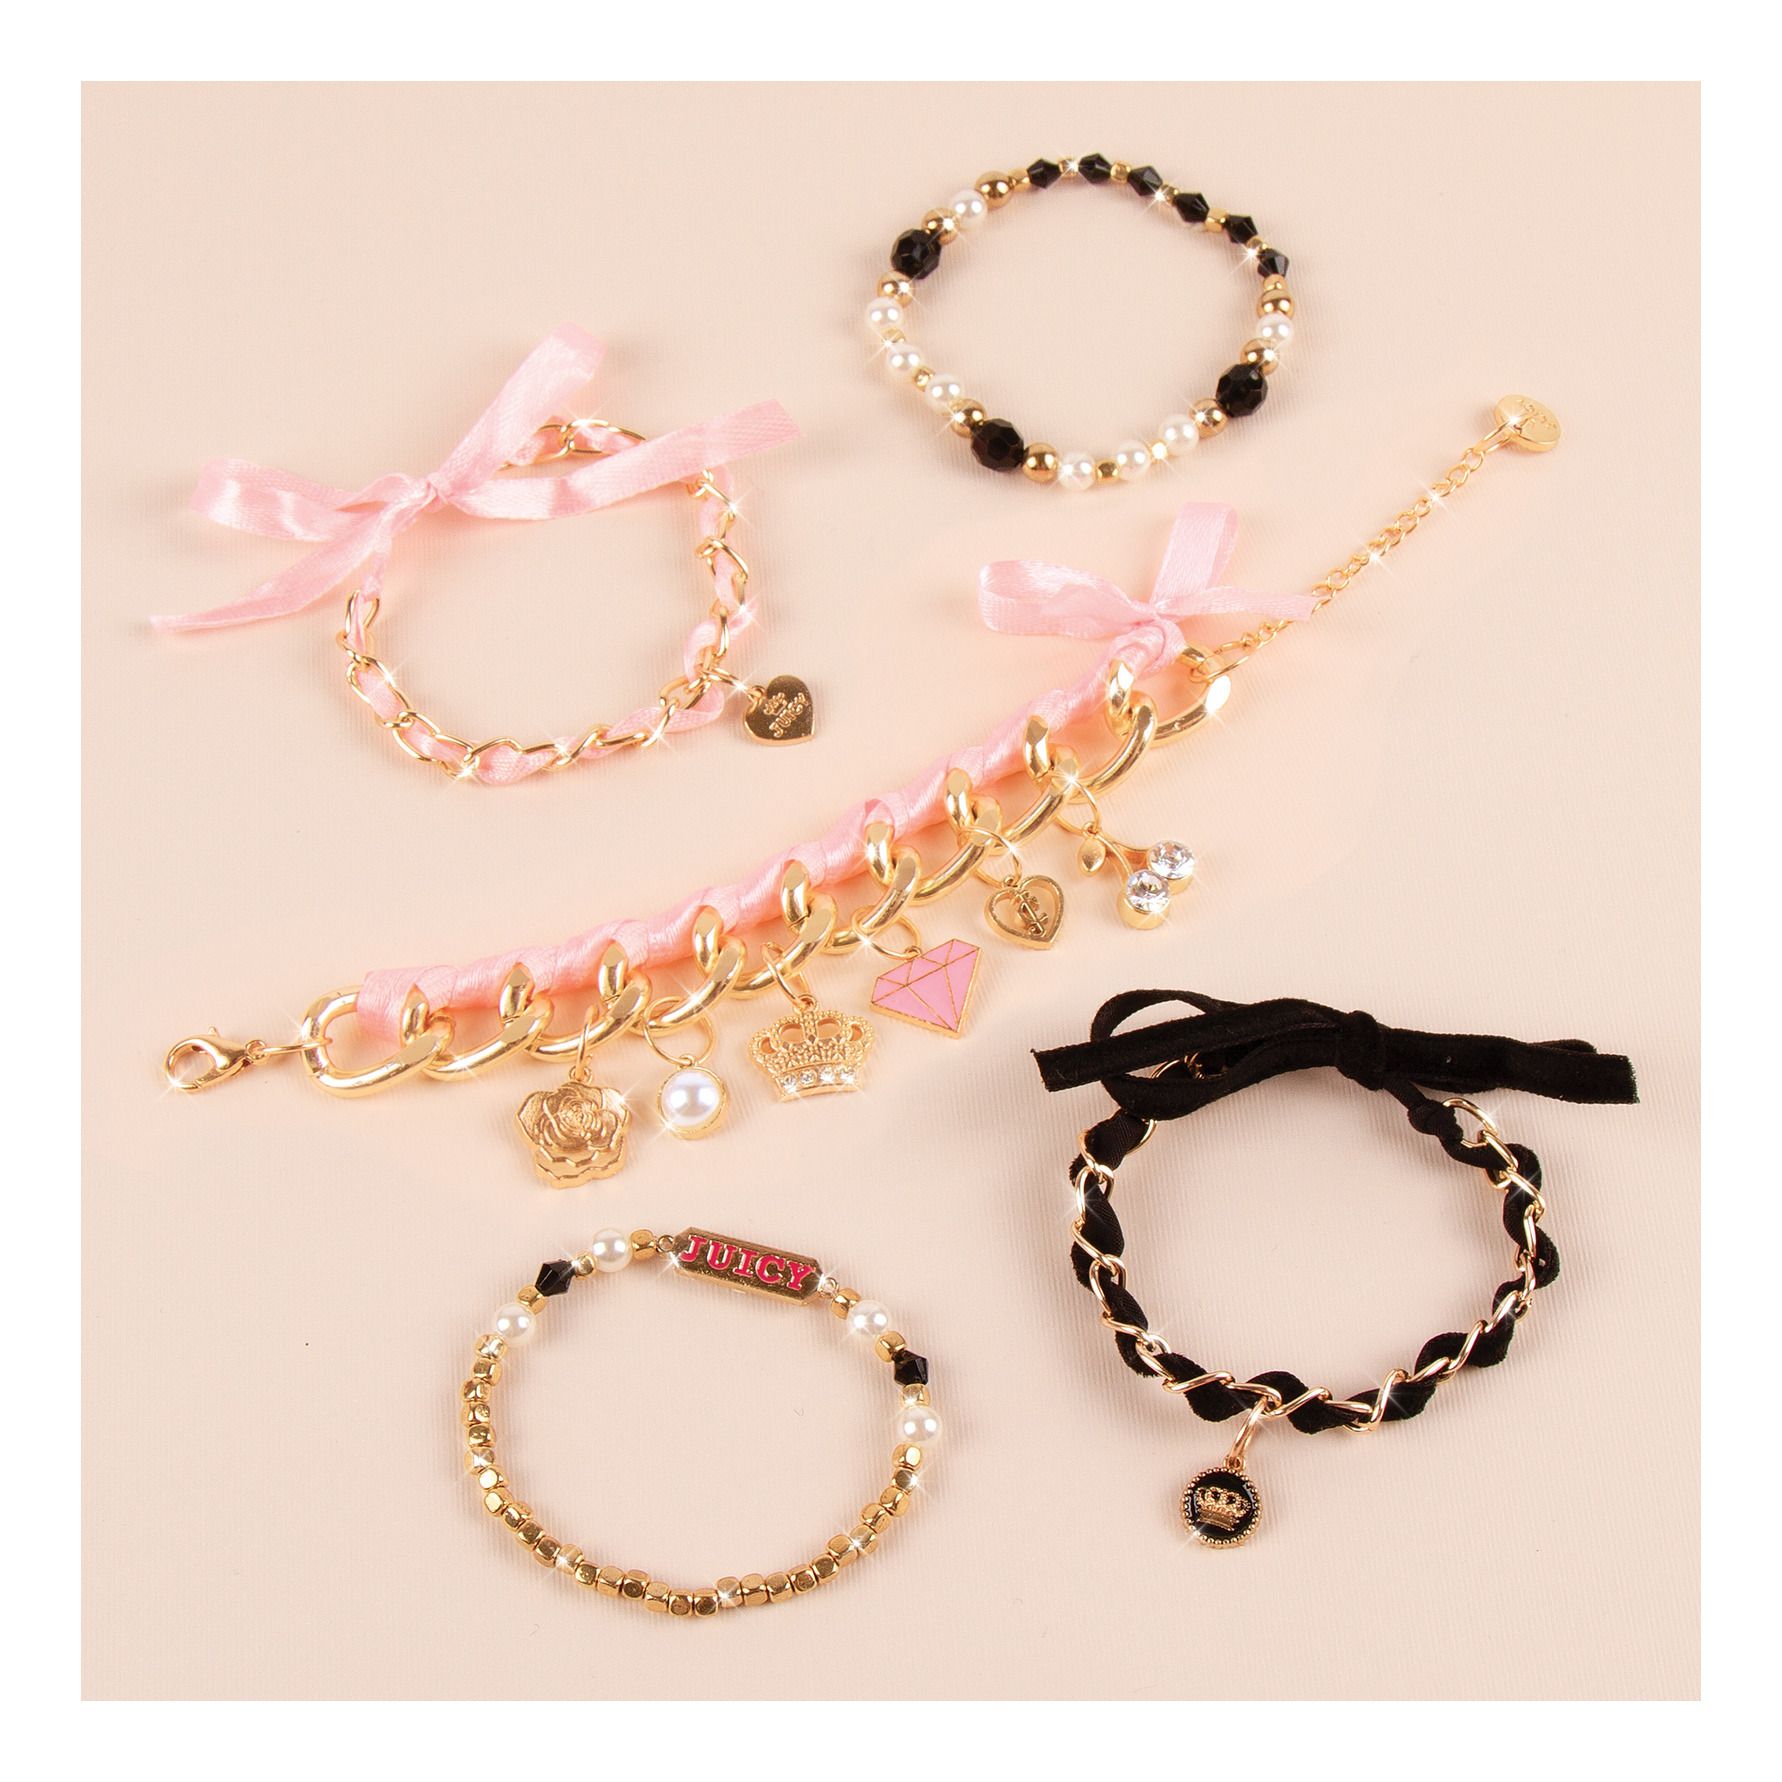 Make It Real Mini Juicy Couture Chains and Charms – Albagame